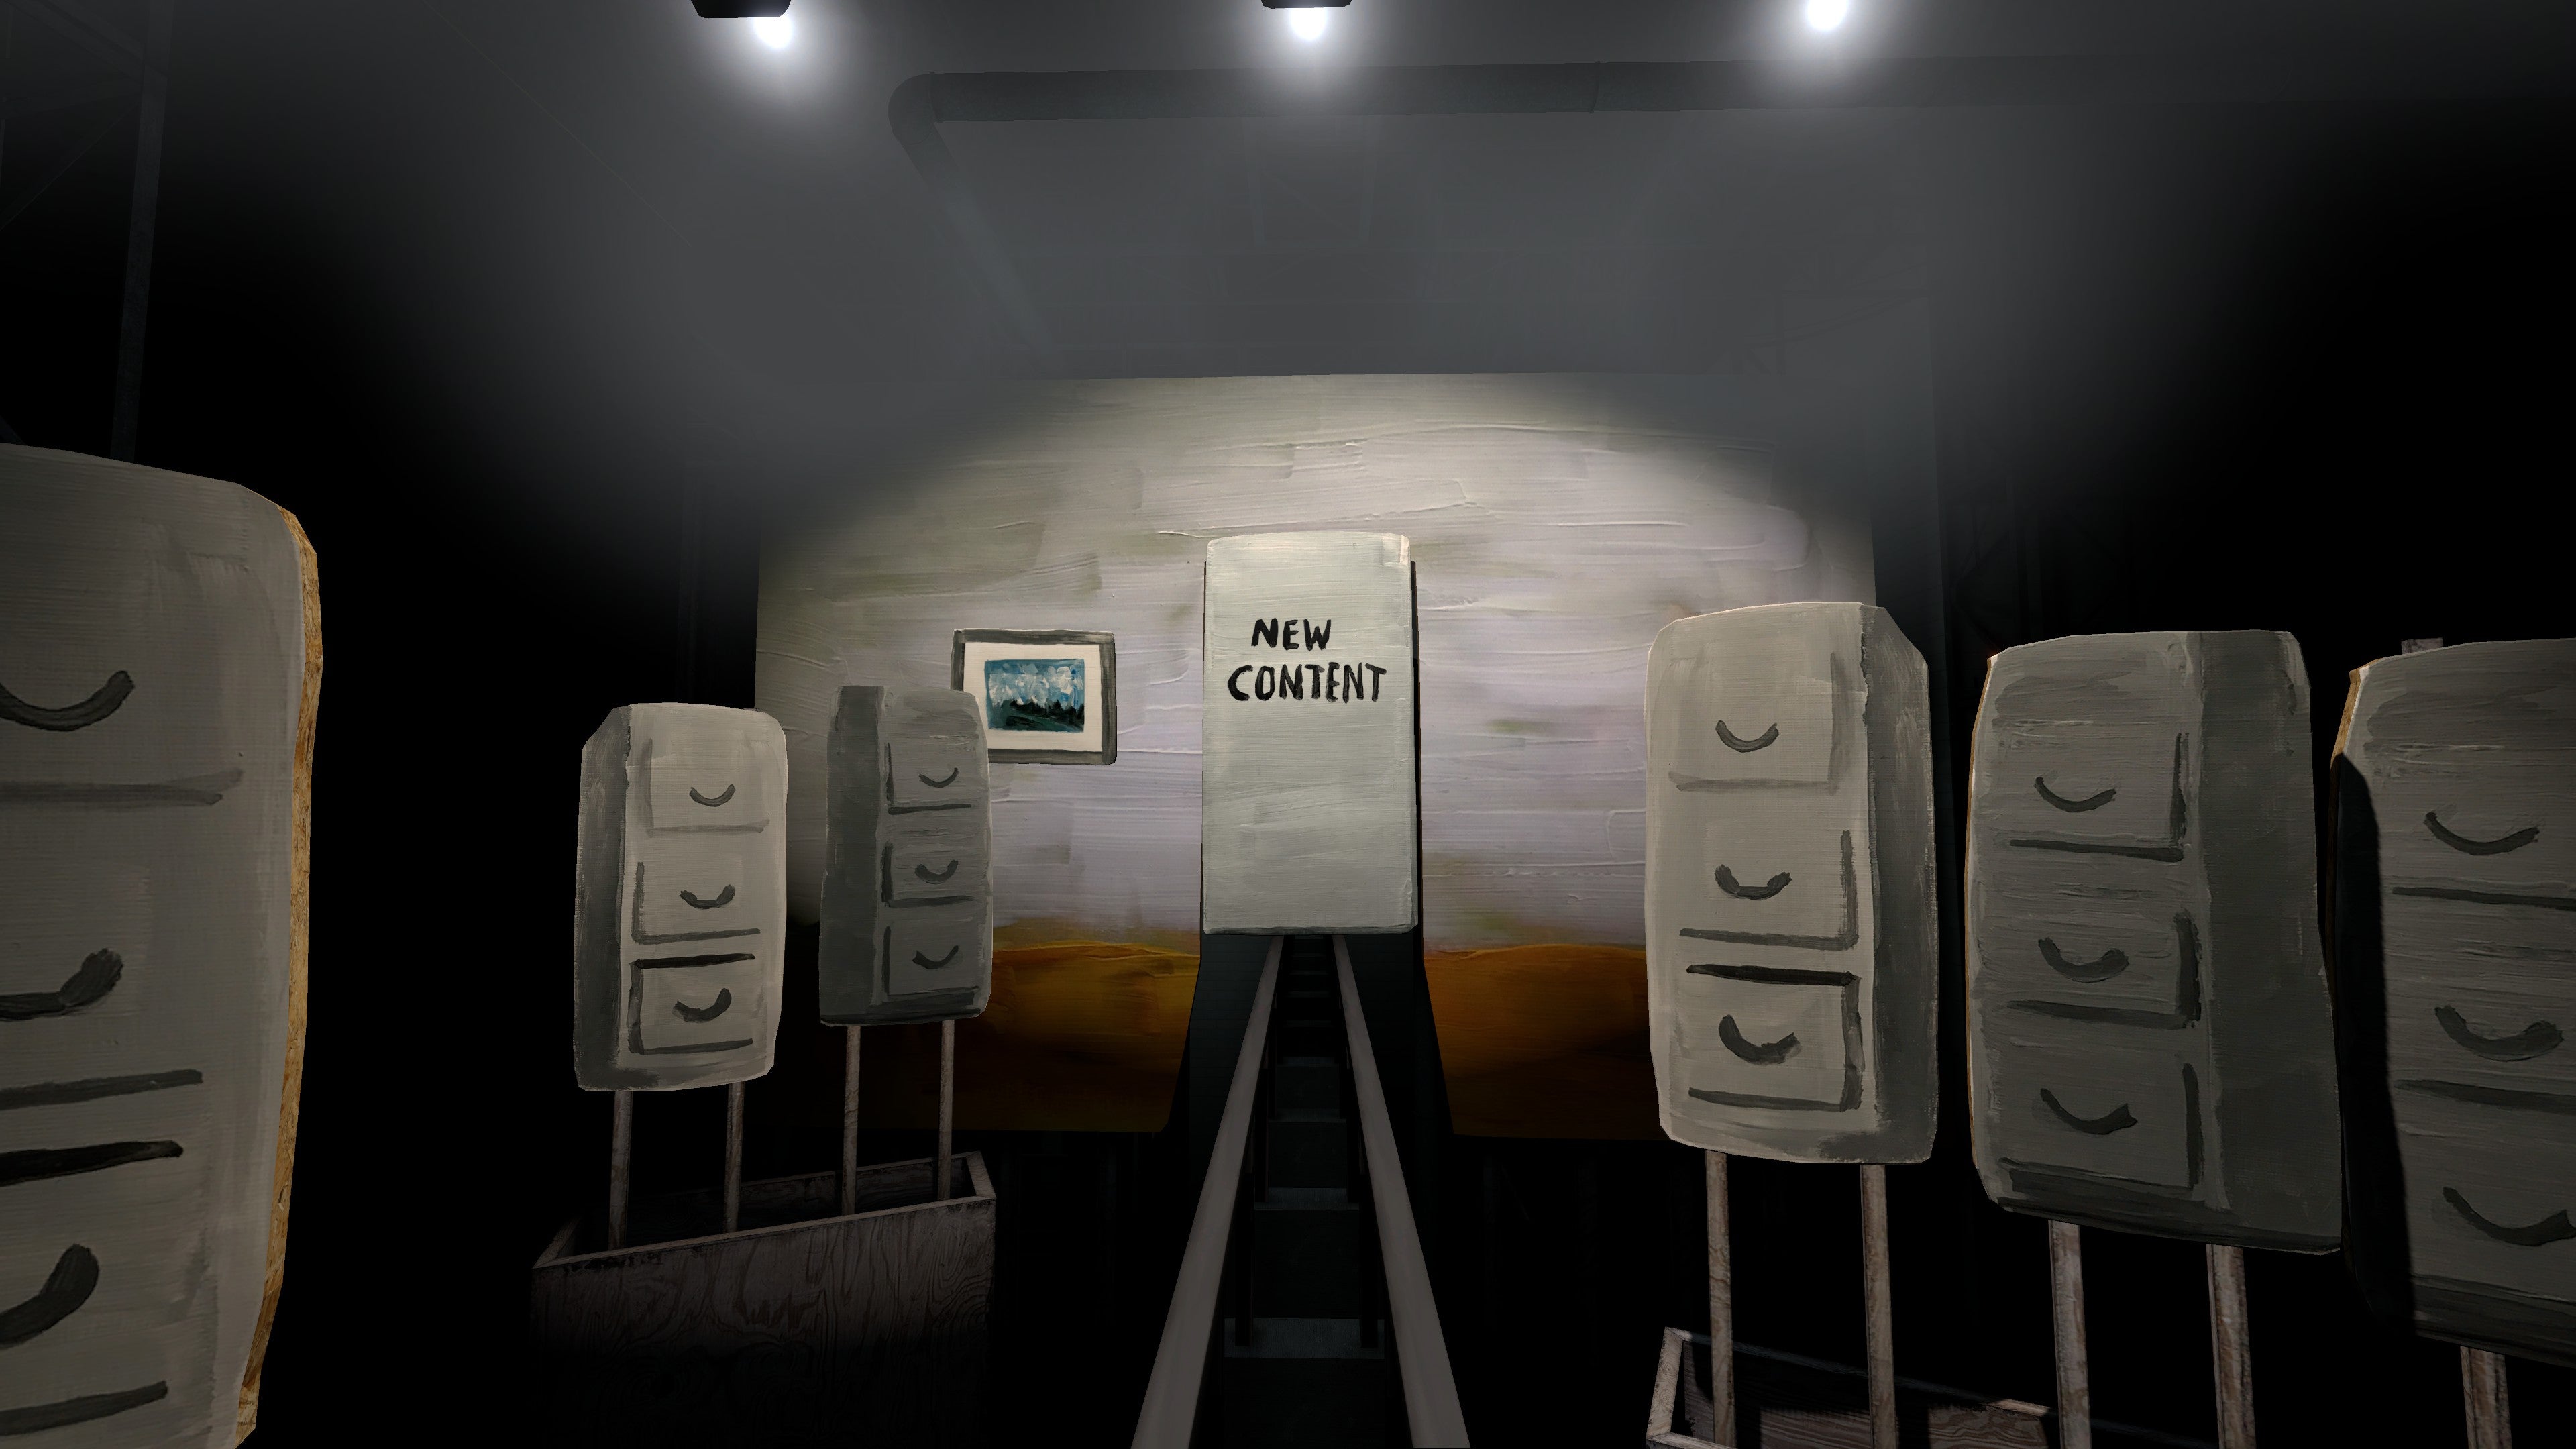 Stanley parable ultra. The Stanley Parable: Ultra Deluxe. Игра the Stanley Parable. Склад Stanley Parable. The Stanley Parable Ultra Deluxe концовки.